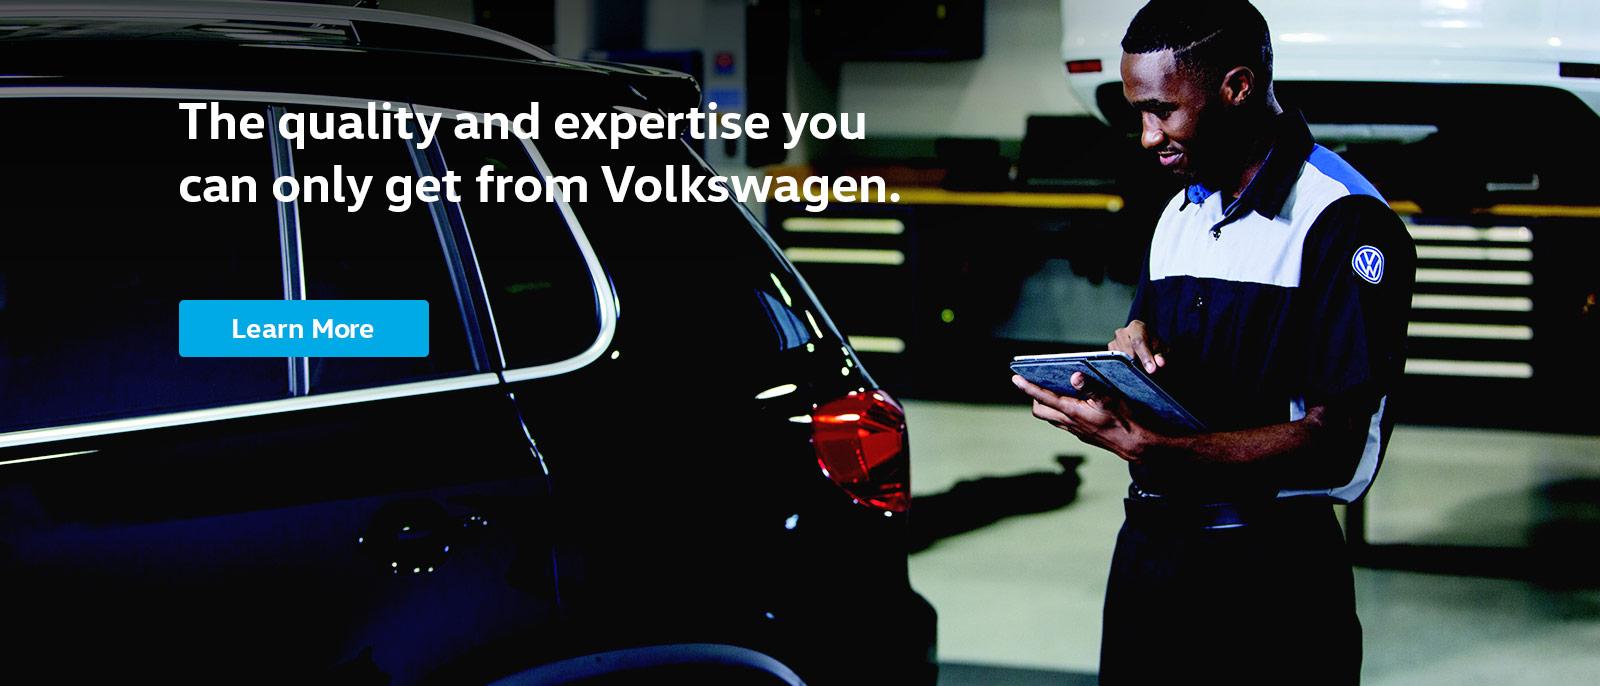 The quality and expertise you can only get from Volkswagen - Learn More